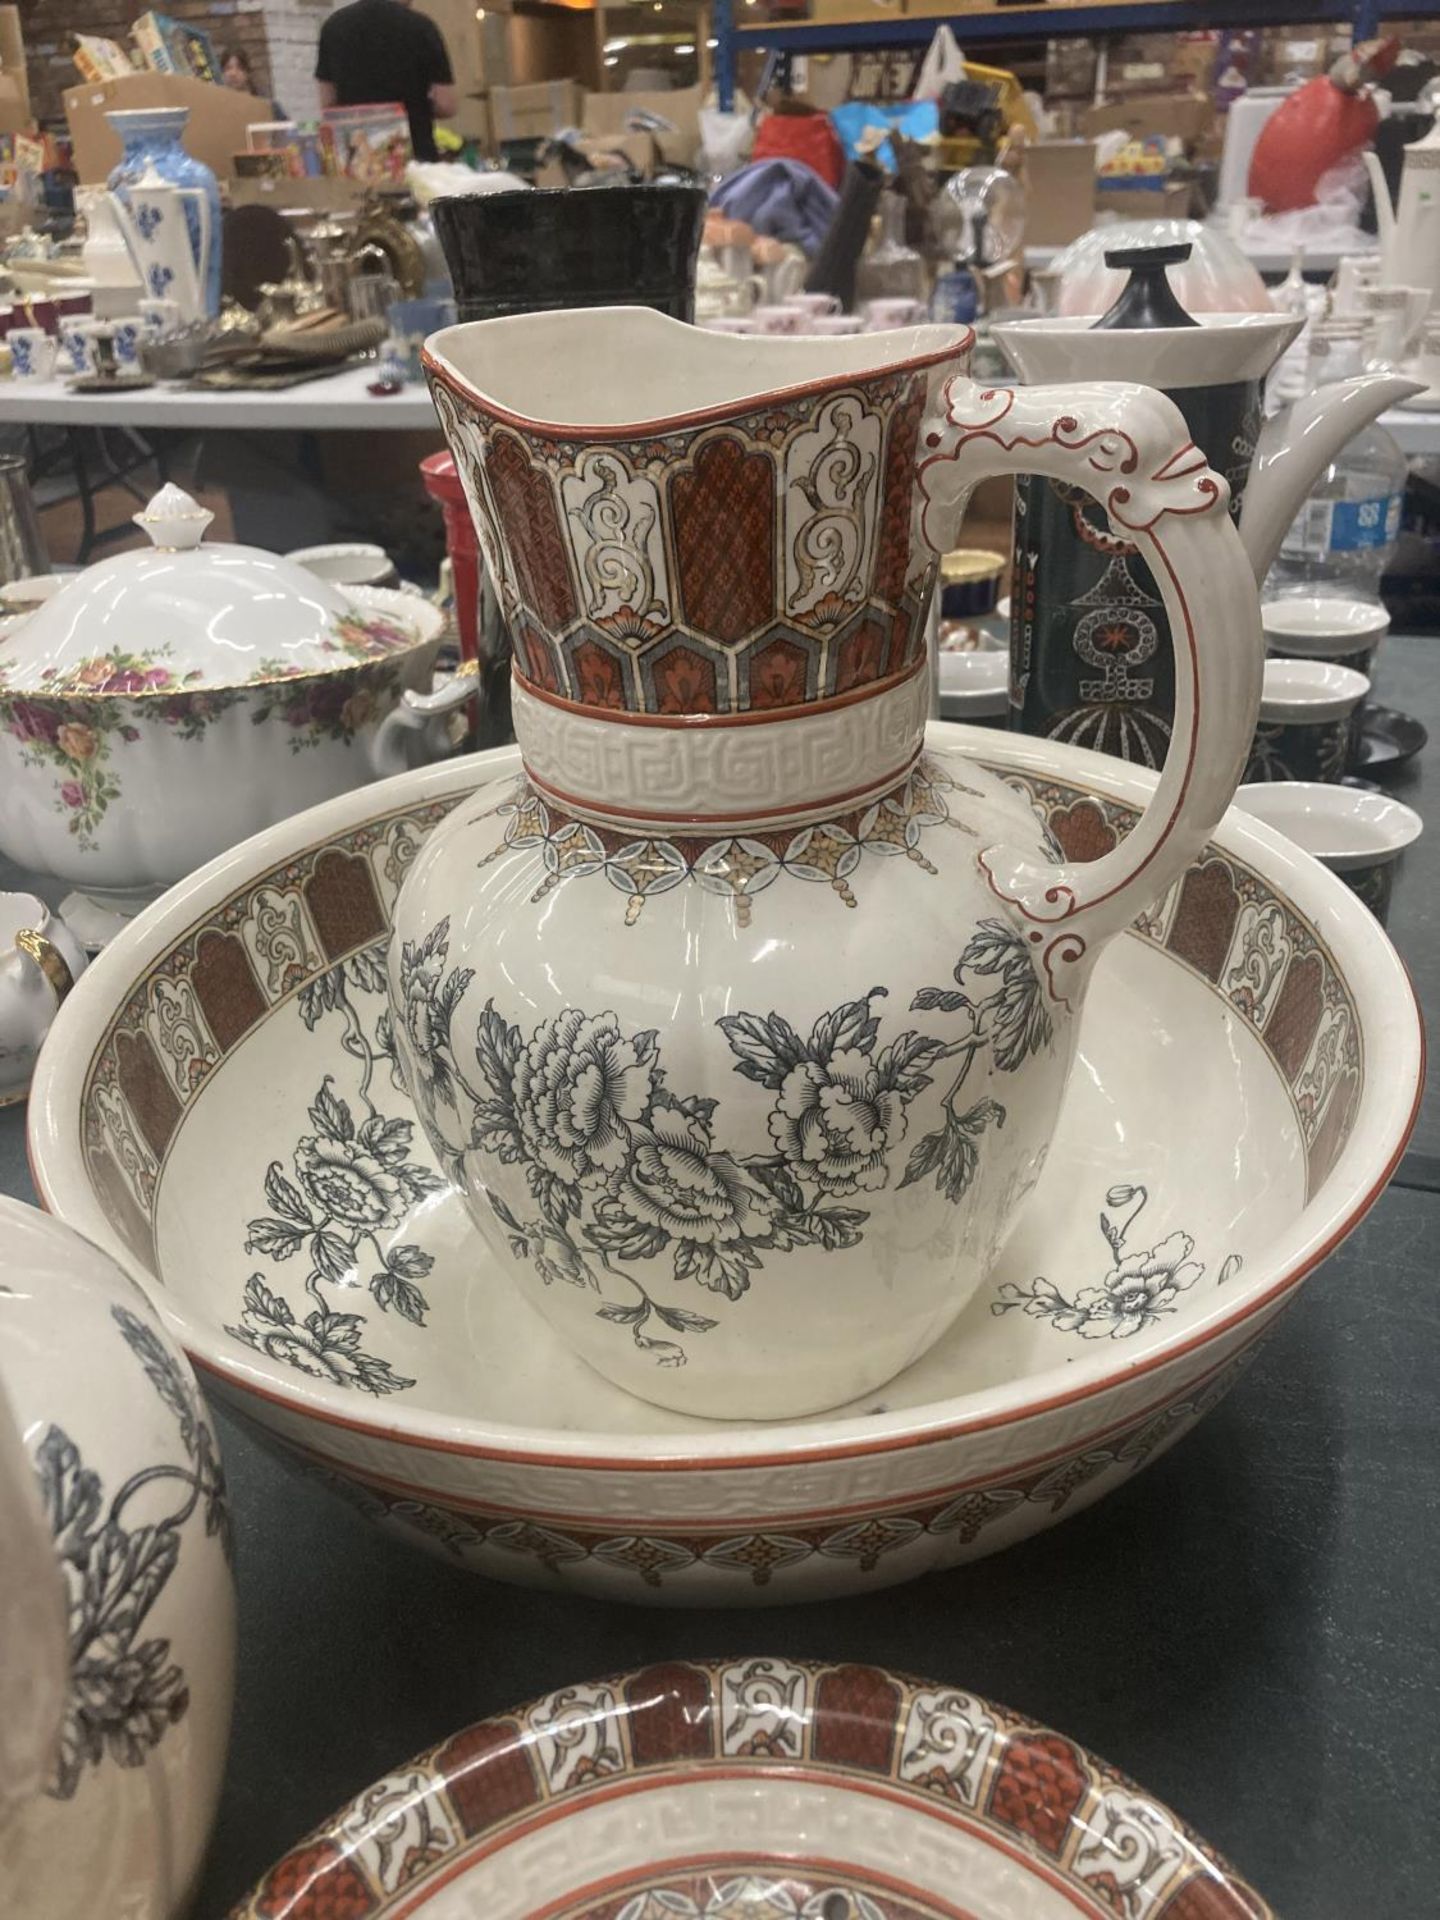 AN EMPIRE, BURSLEM FLORAL PRINTED VINTAGE BATHROOM SET TO INCLUDE WASHBOWL, JUGS, SOAP DISHES, ETC - Image 2 of 7